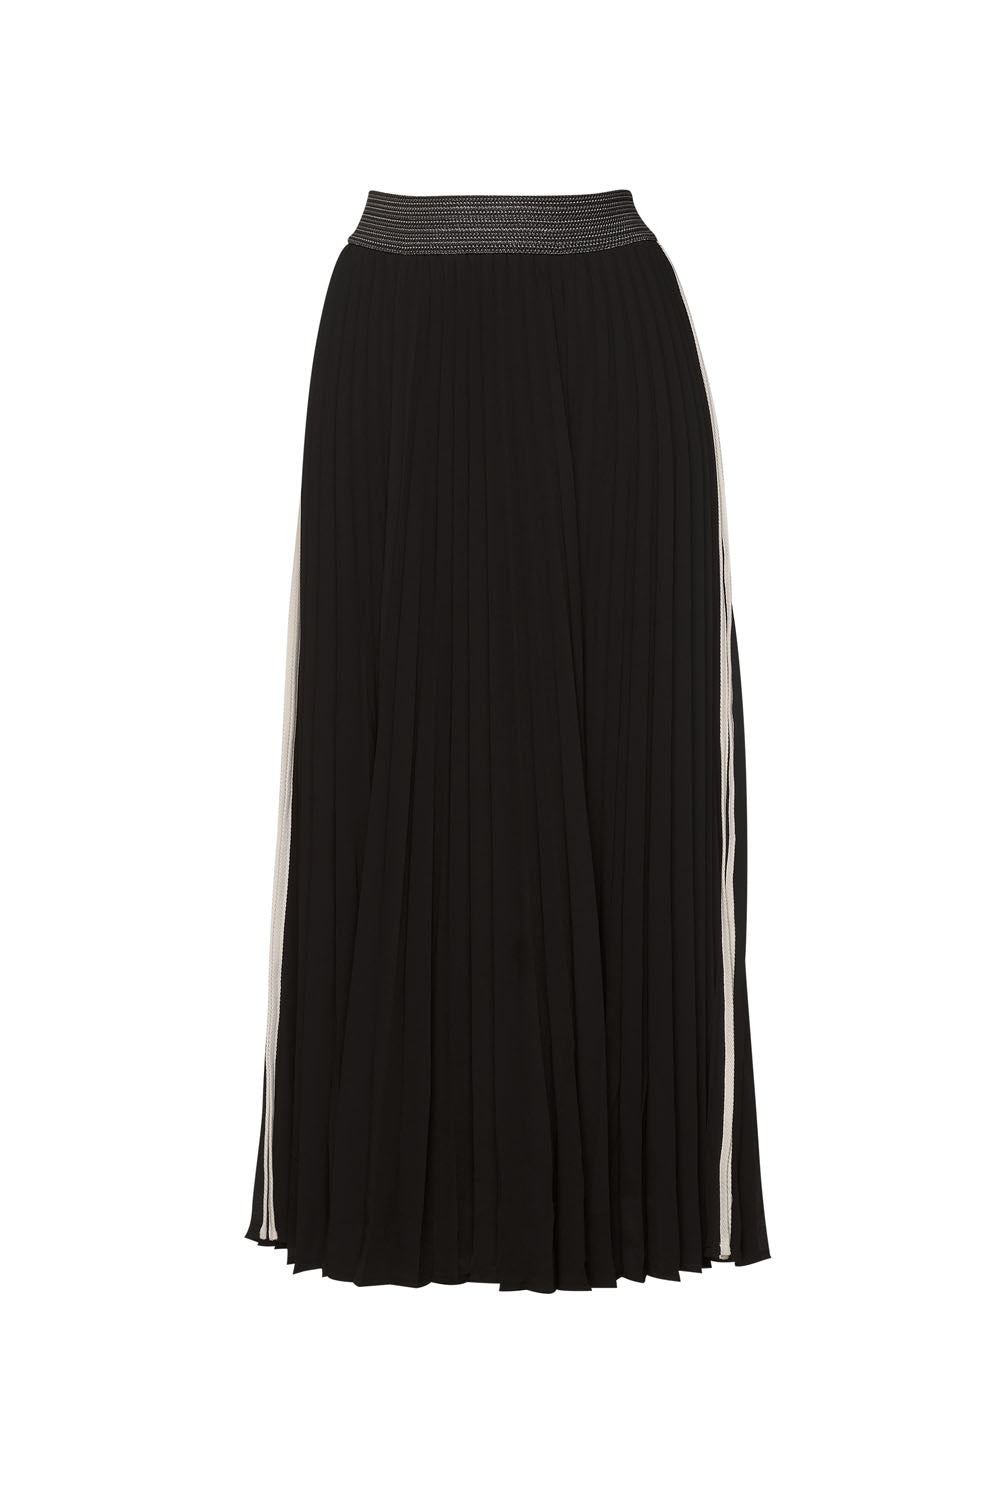 Madly Sweetly Just Pleat It Skirt - Black